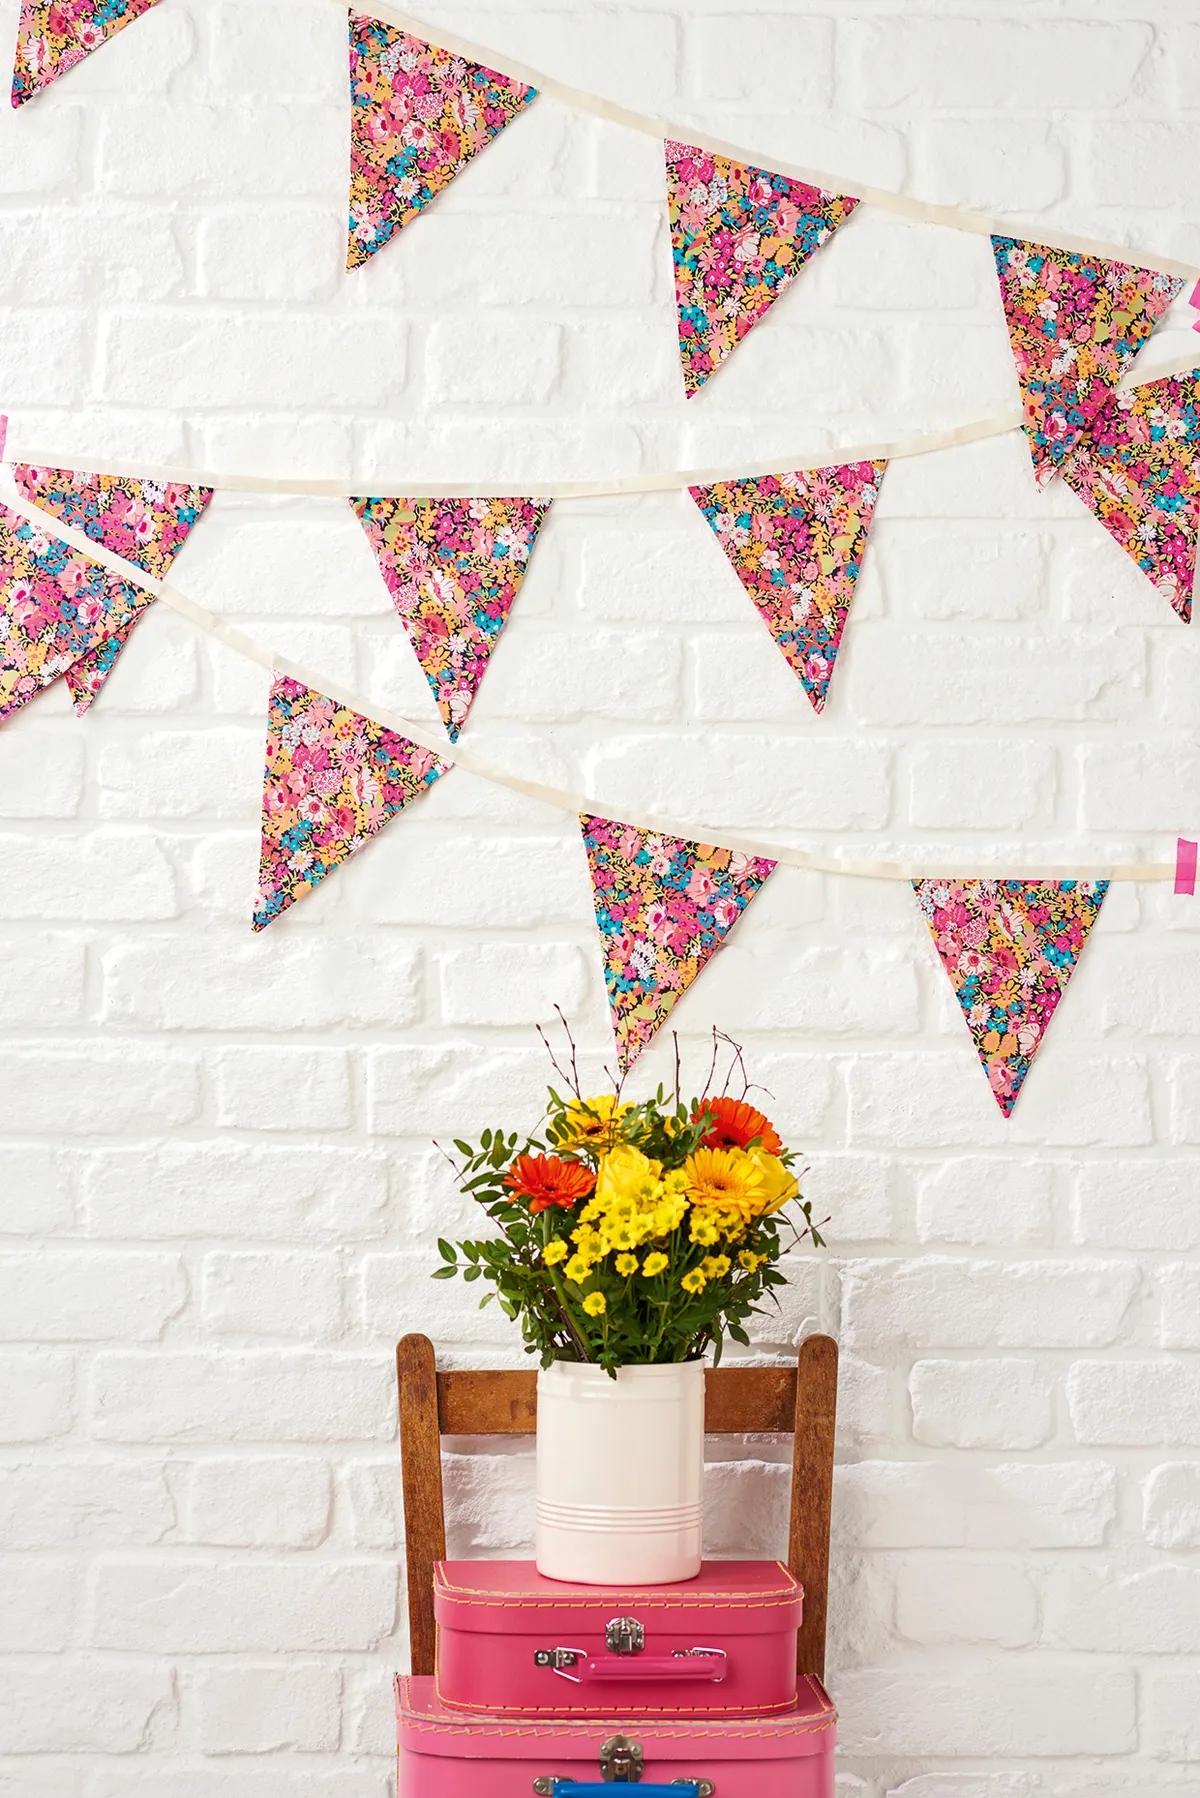 How to make fabric bunting